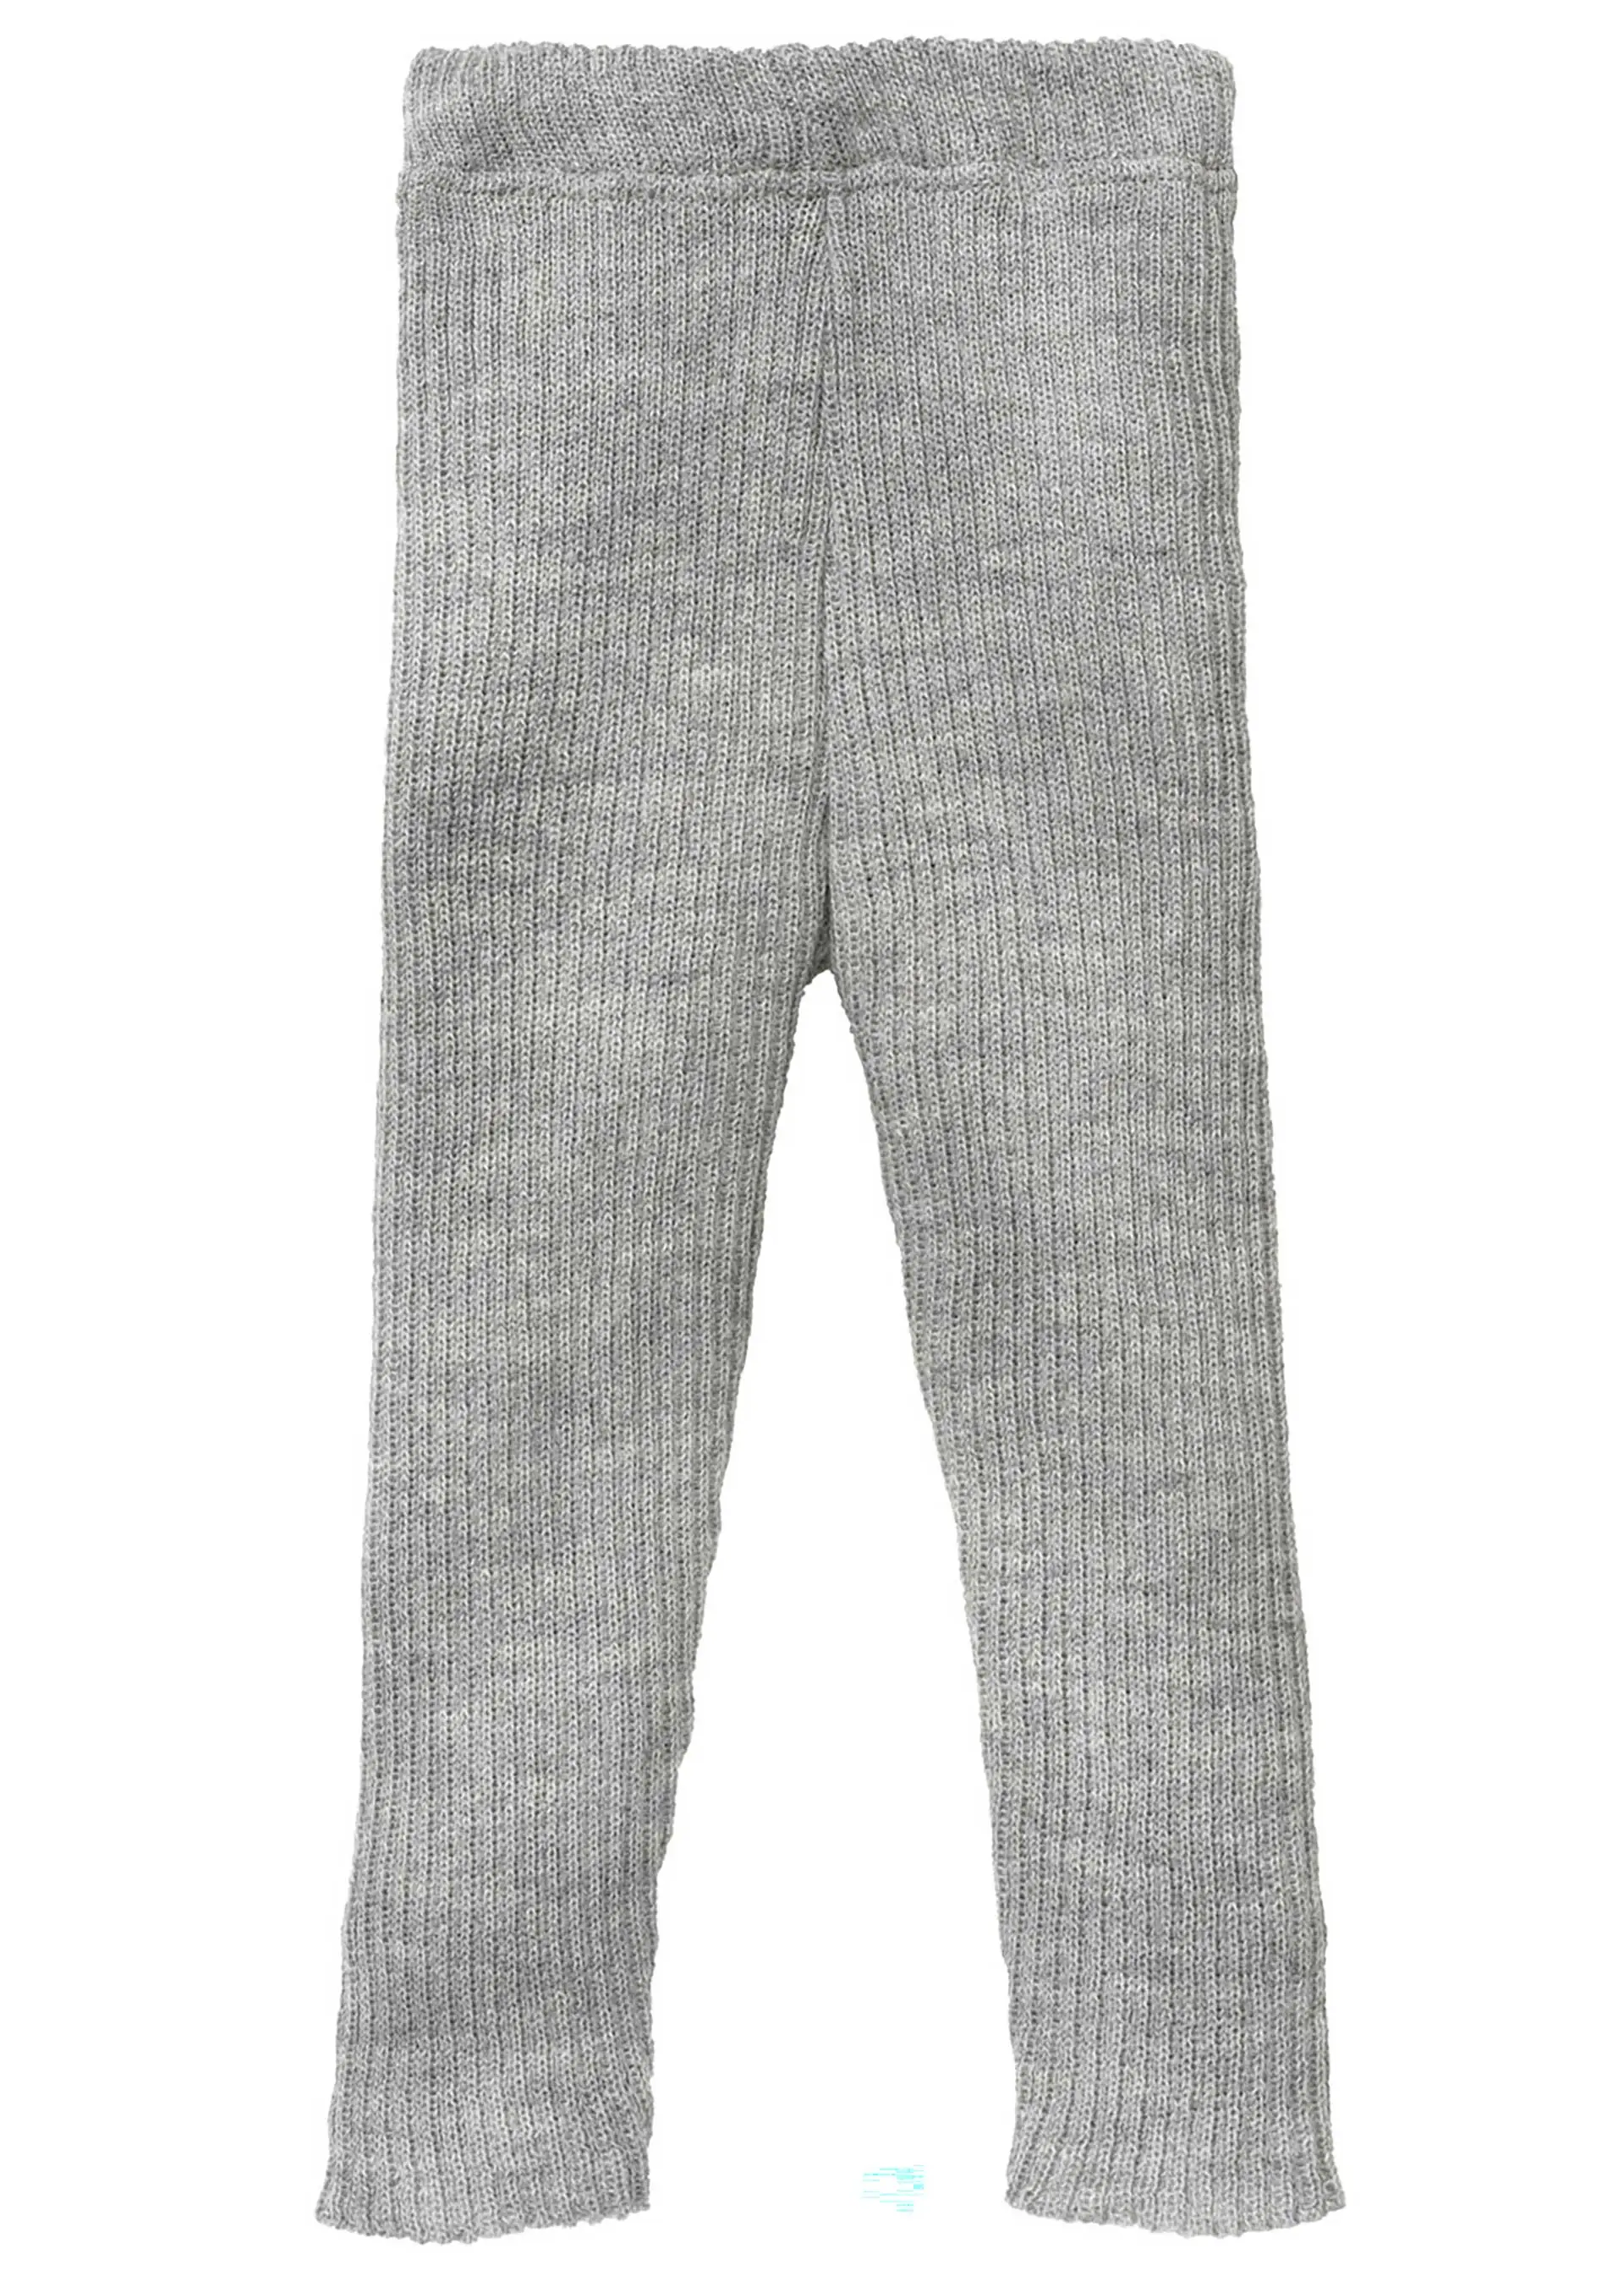 Knitted Leggings - discontinued size